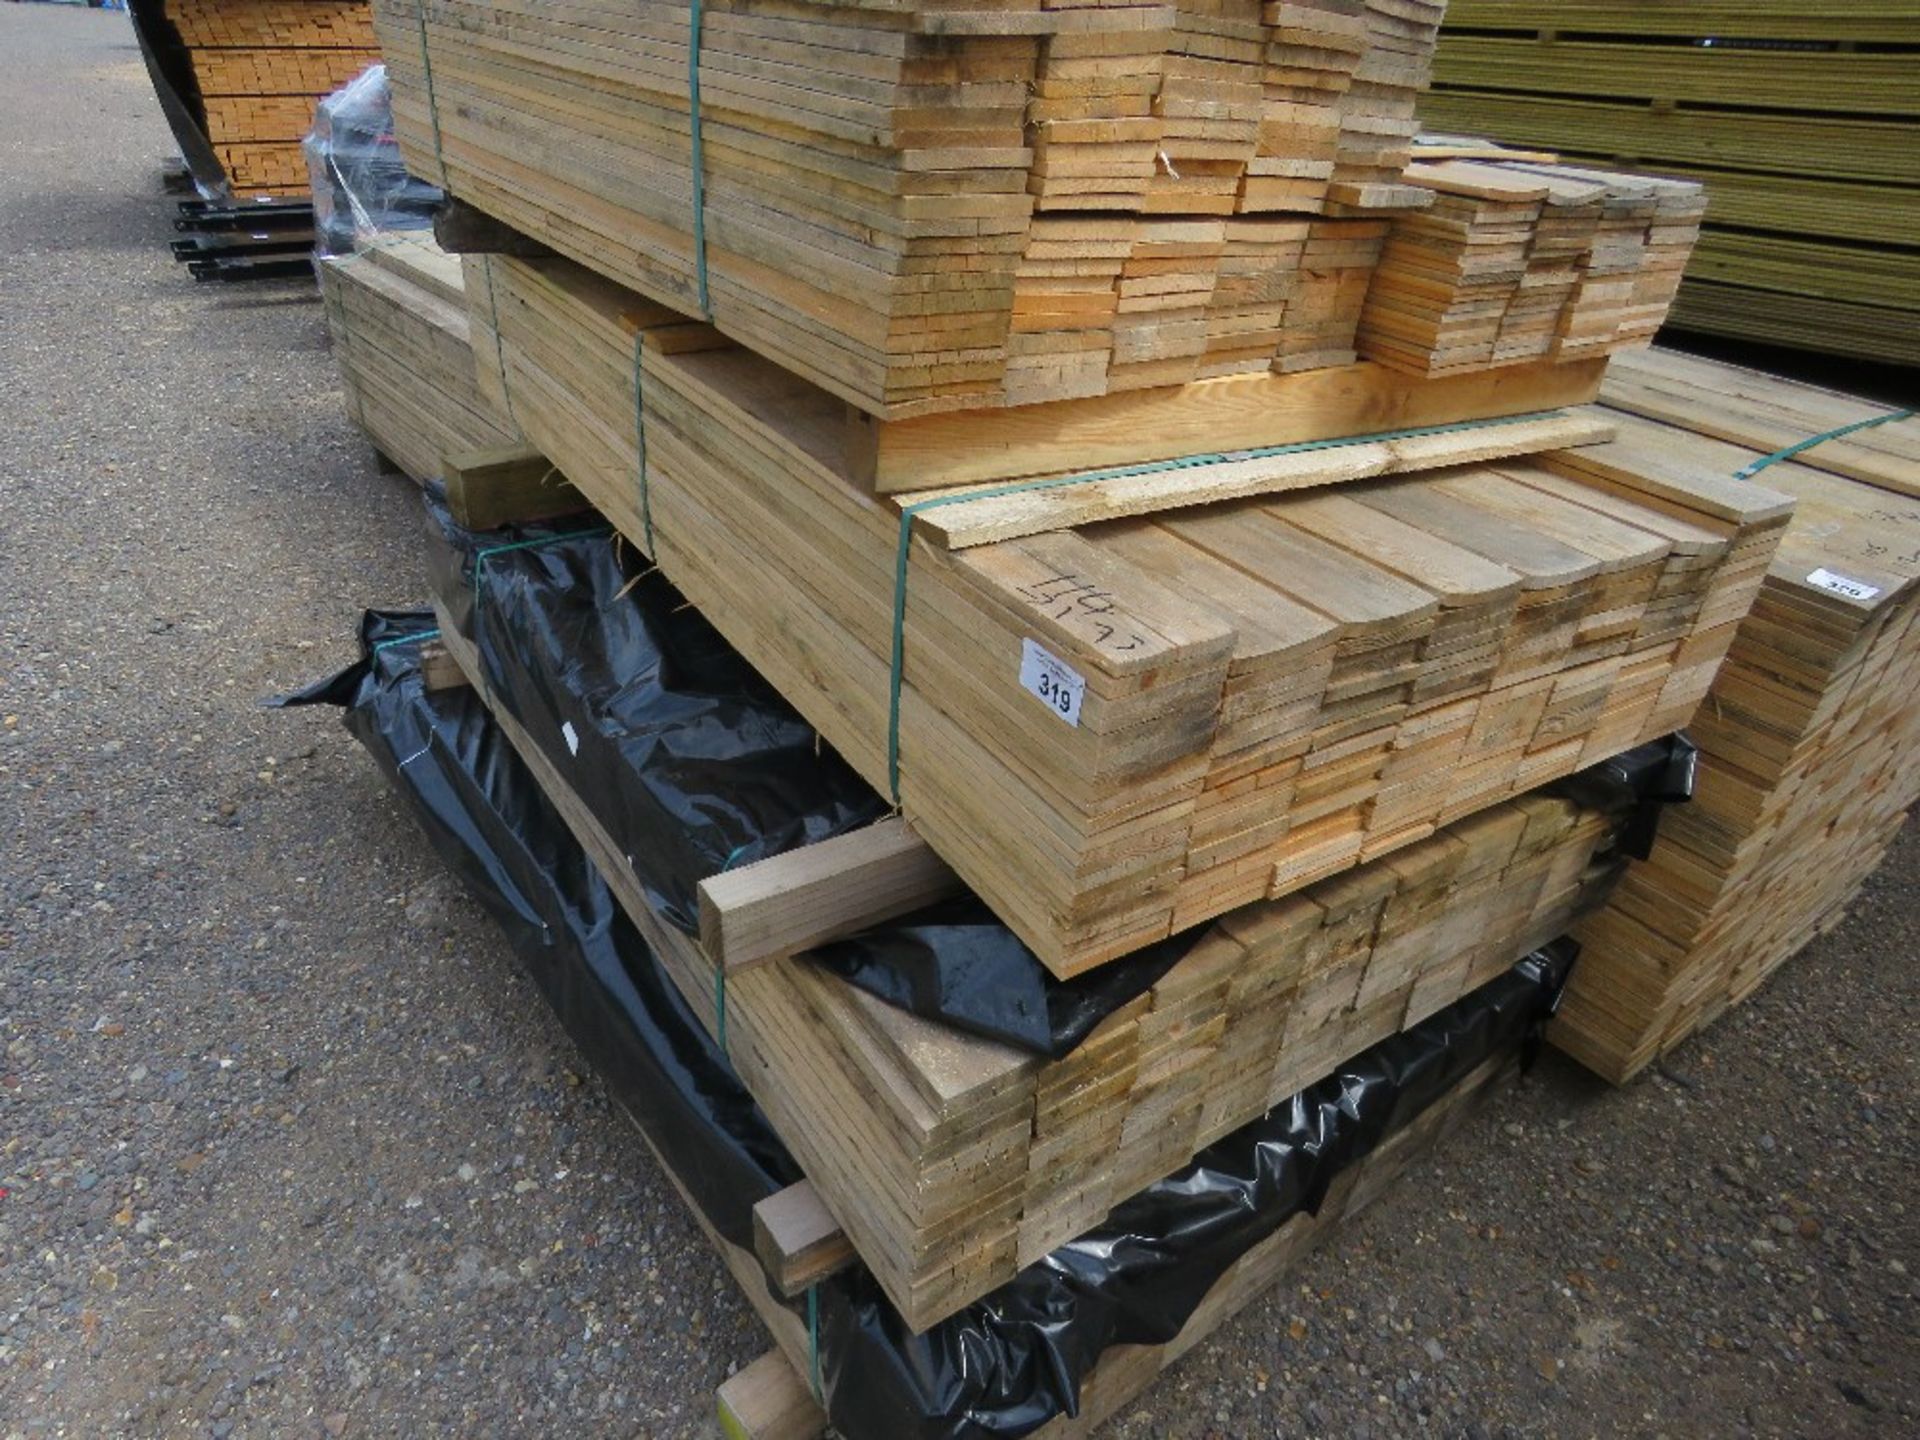 STACK CONTAINING 4 BUNDLES OF UNTREATED FENCE CLADDING TIMBER BOARDS, 1.14M -1.73M LENGTHAPPROX.